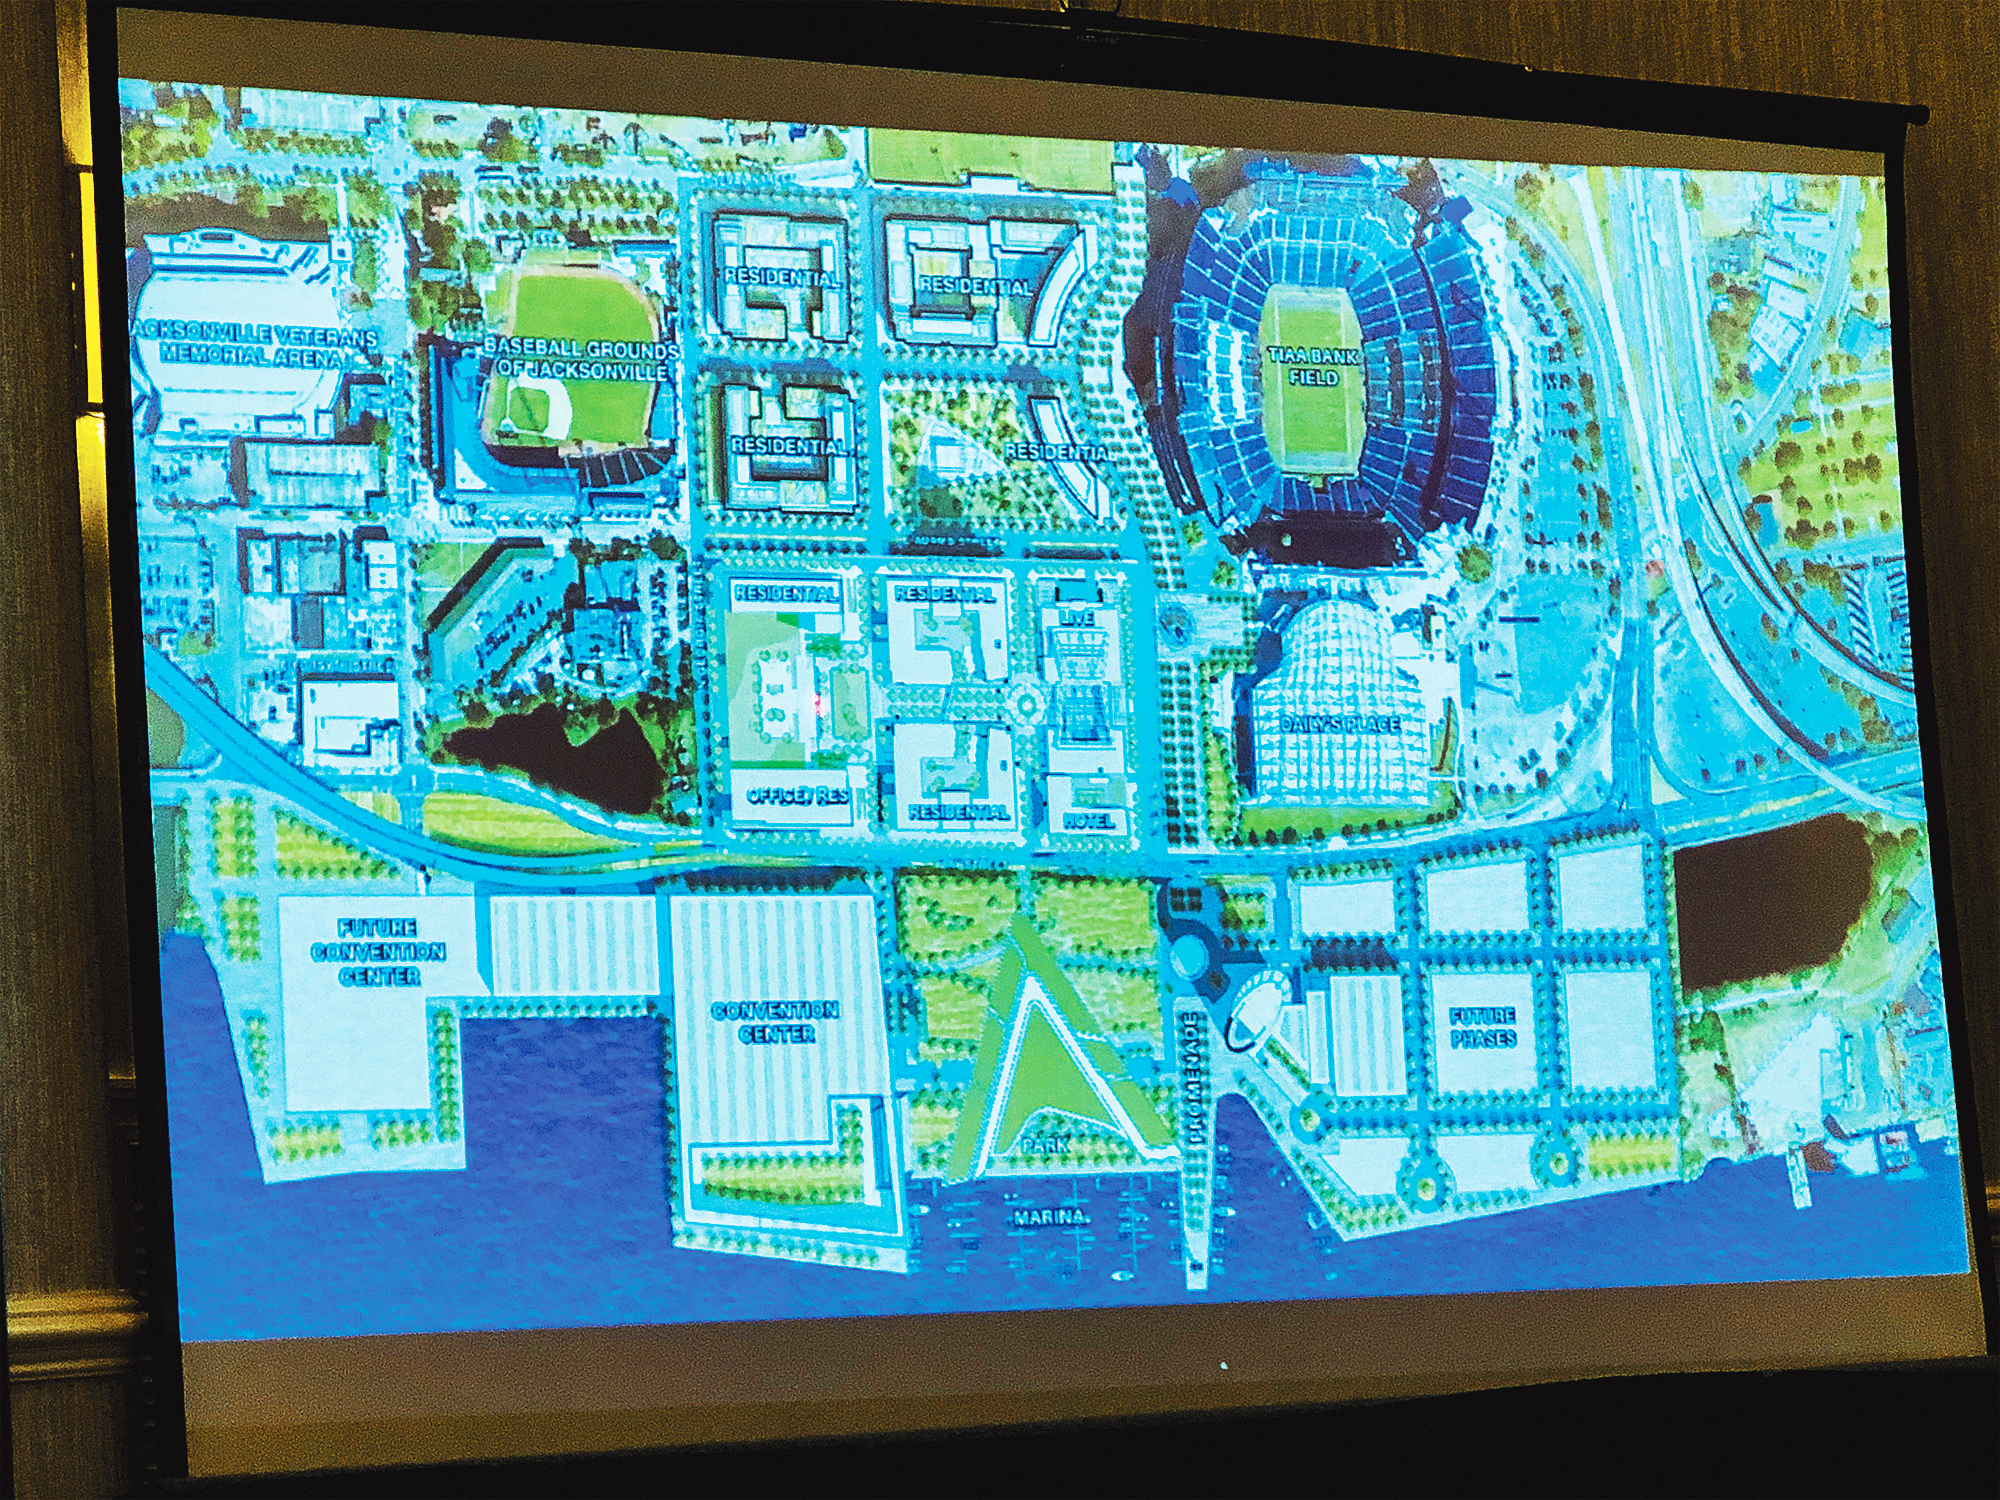 Cordish Companies Chief Operating Officer Zed Smith showed this map of potential development at Metropolitan Park to the Meninak Club of Jacksonville in March. Cordish is working with Iguana on development plans for the area.